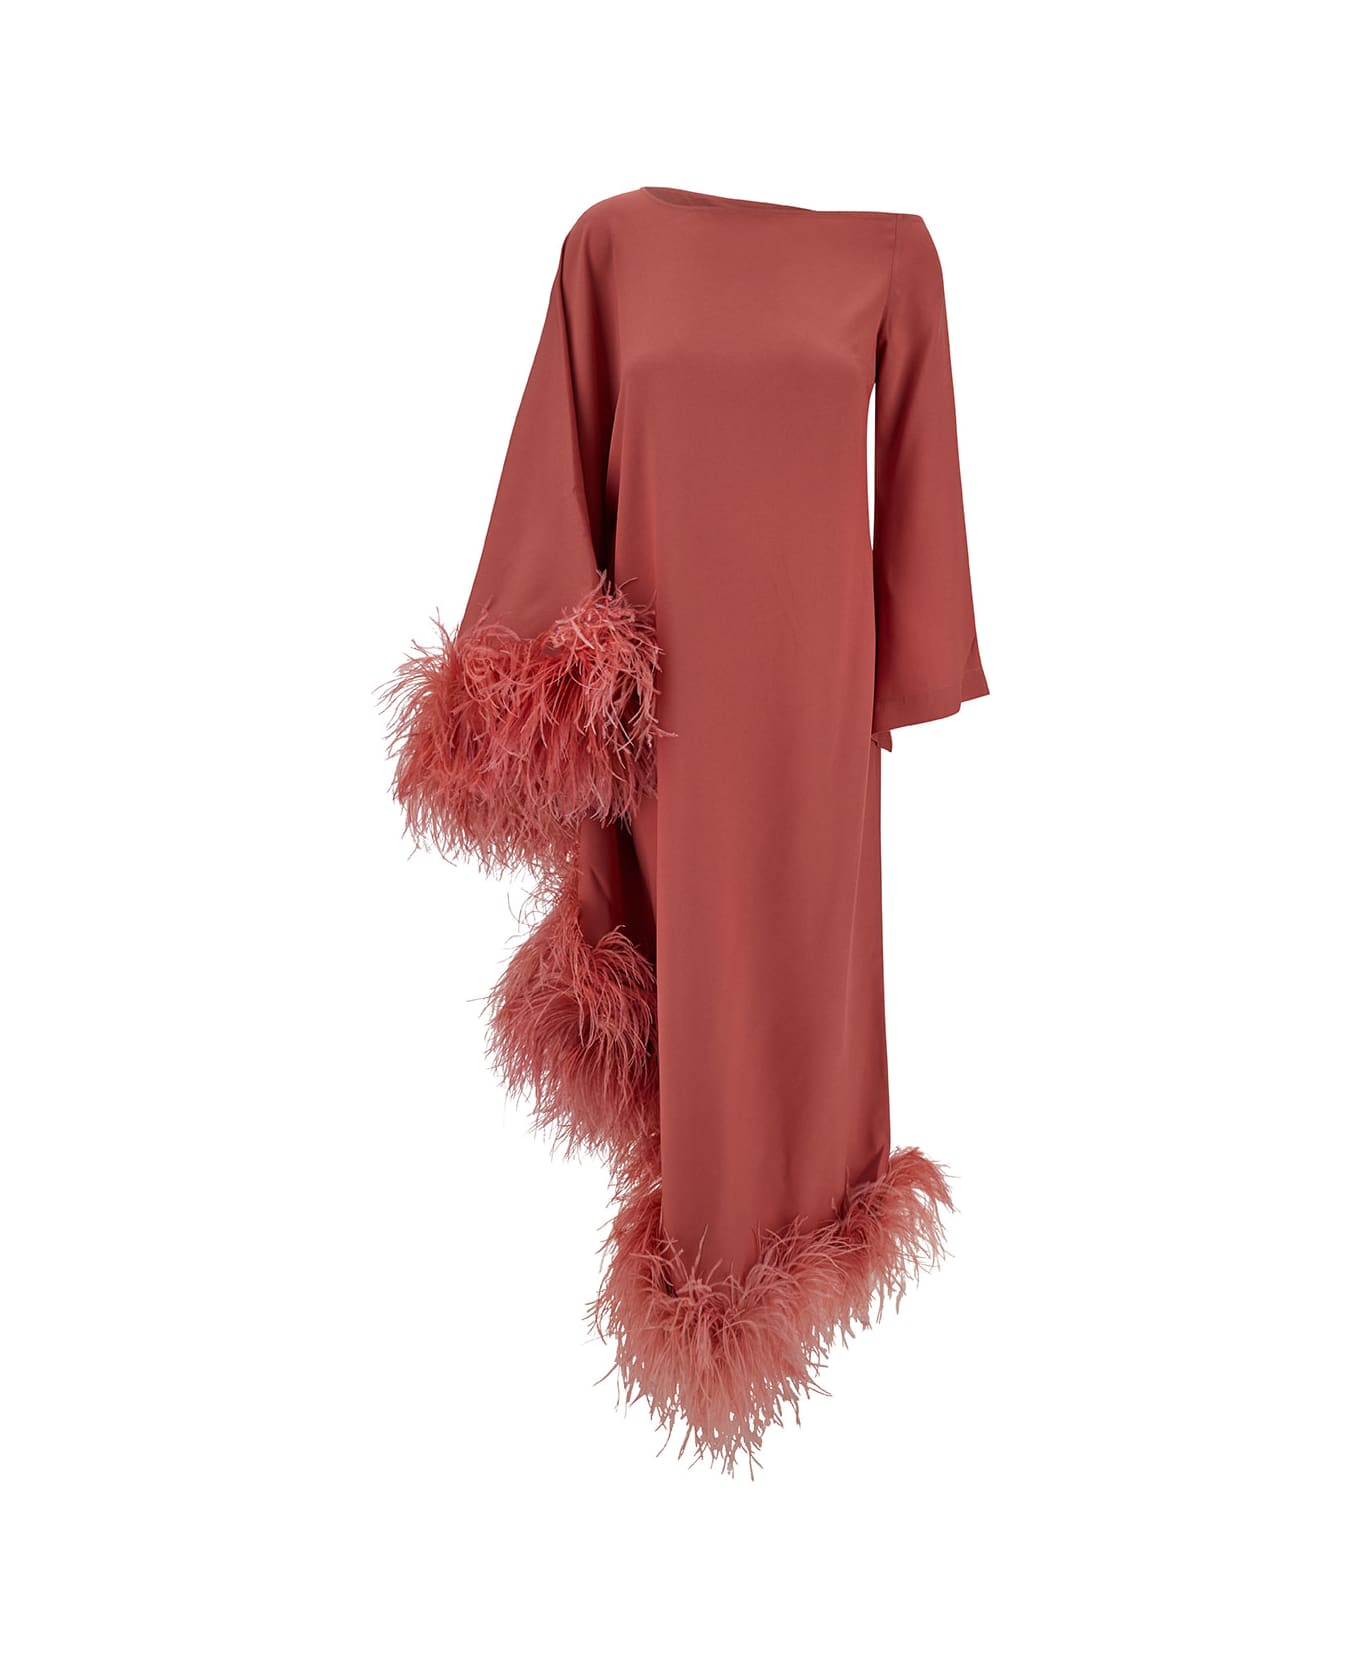 Taller Marmo Salmon Pink Dress With Tonal Feather Trim In Acetate Blend Woman - Pink